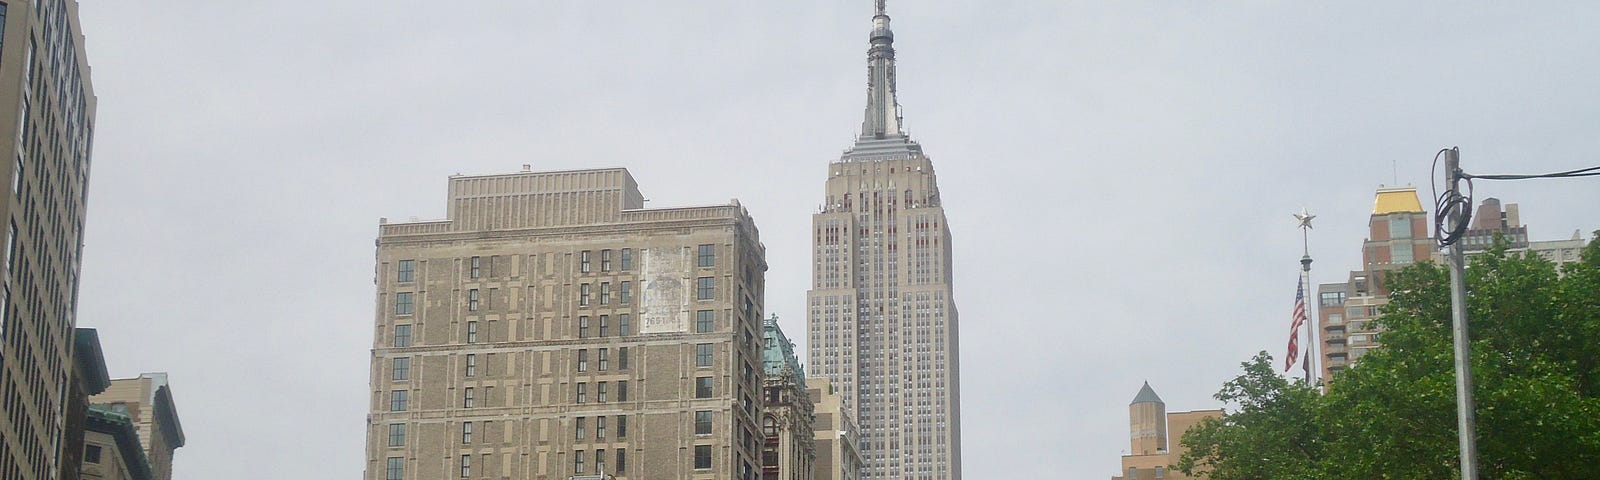 Empire State Building pictured from city streets of New York.